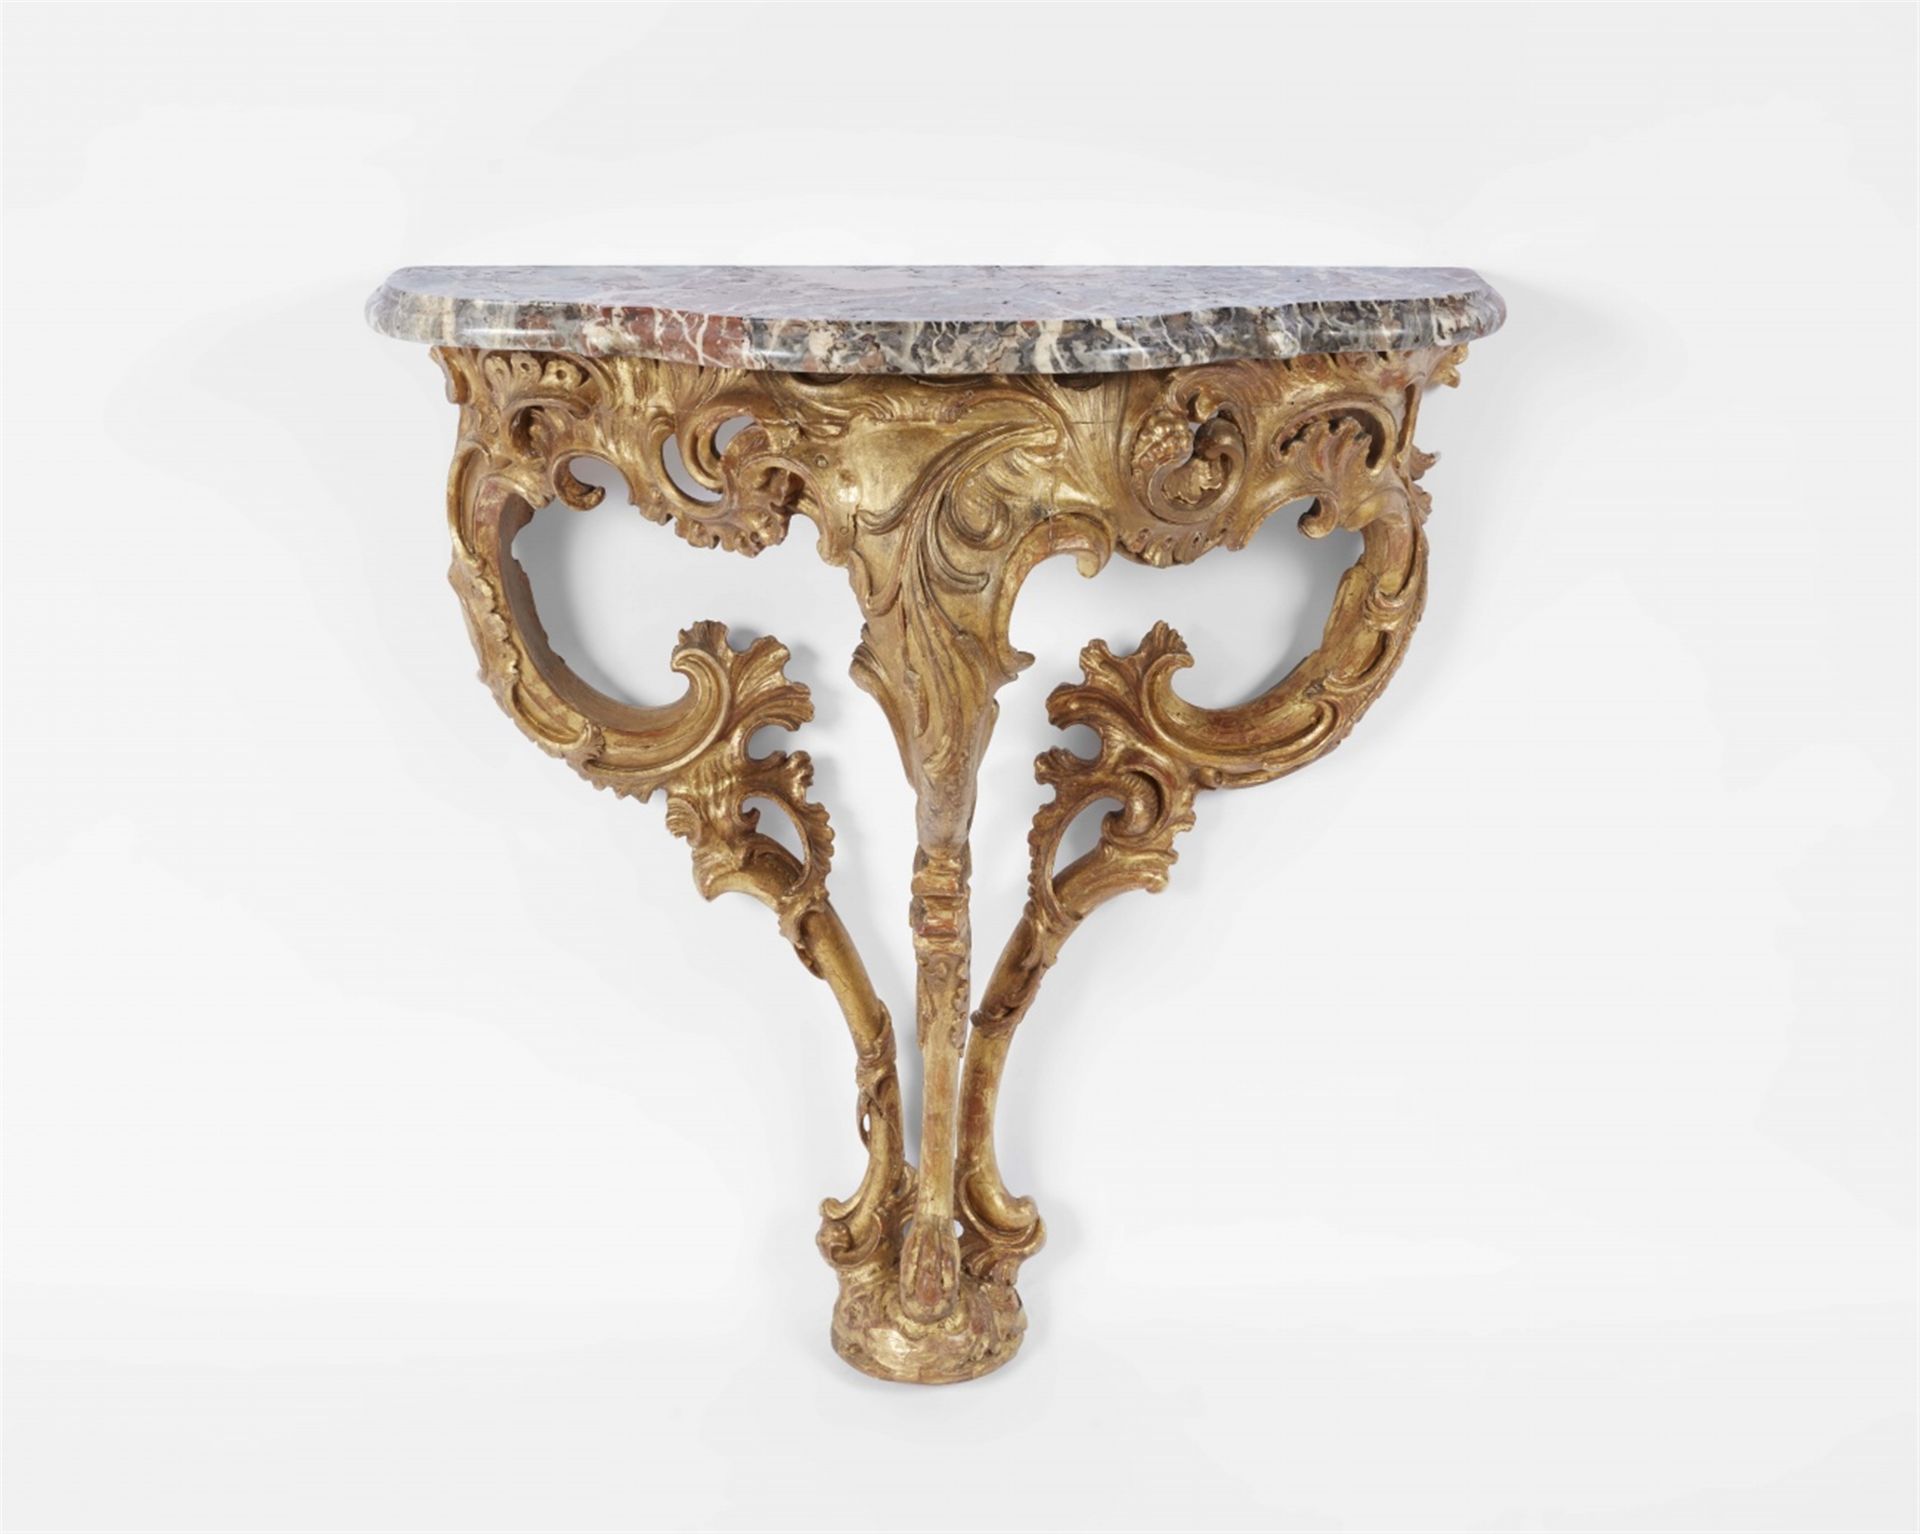 A carved South German Rococo console table